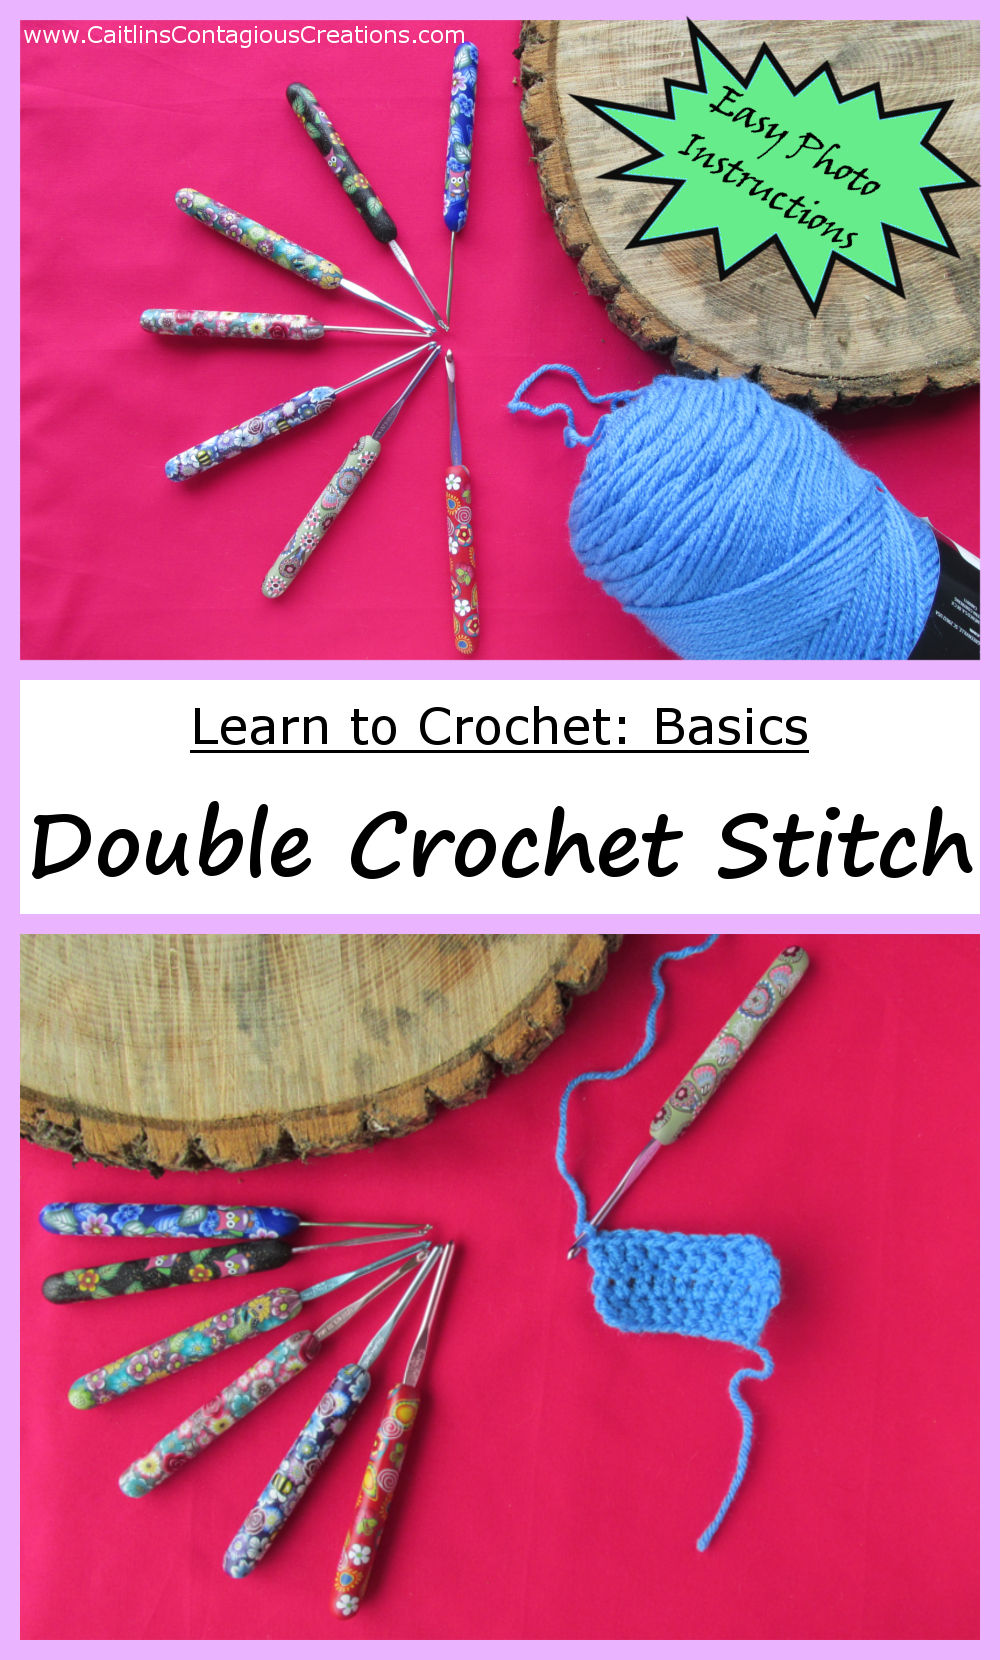 Learn to Crochet the Double Crochet Stitch, a tutorial from Caitlin's Contagious Creations. This easy to follow guide is full of pictures and simple instructions. This beginner friendly lesson is a great way to expand your crochet skill set.